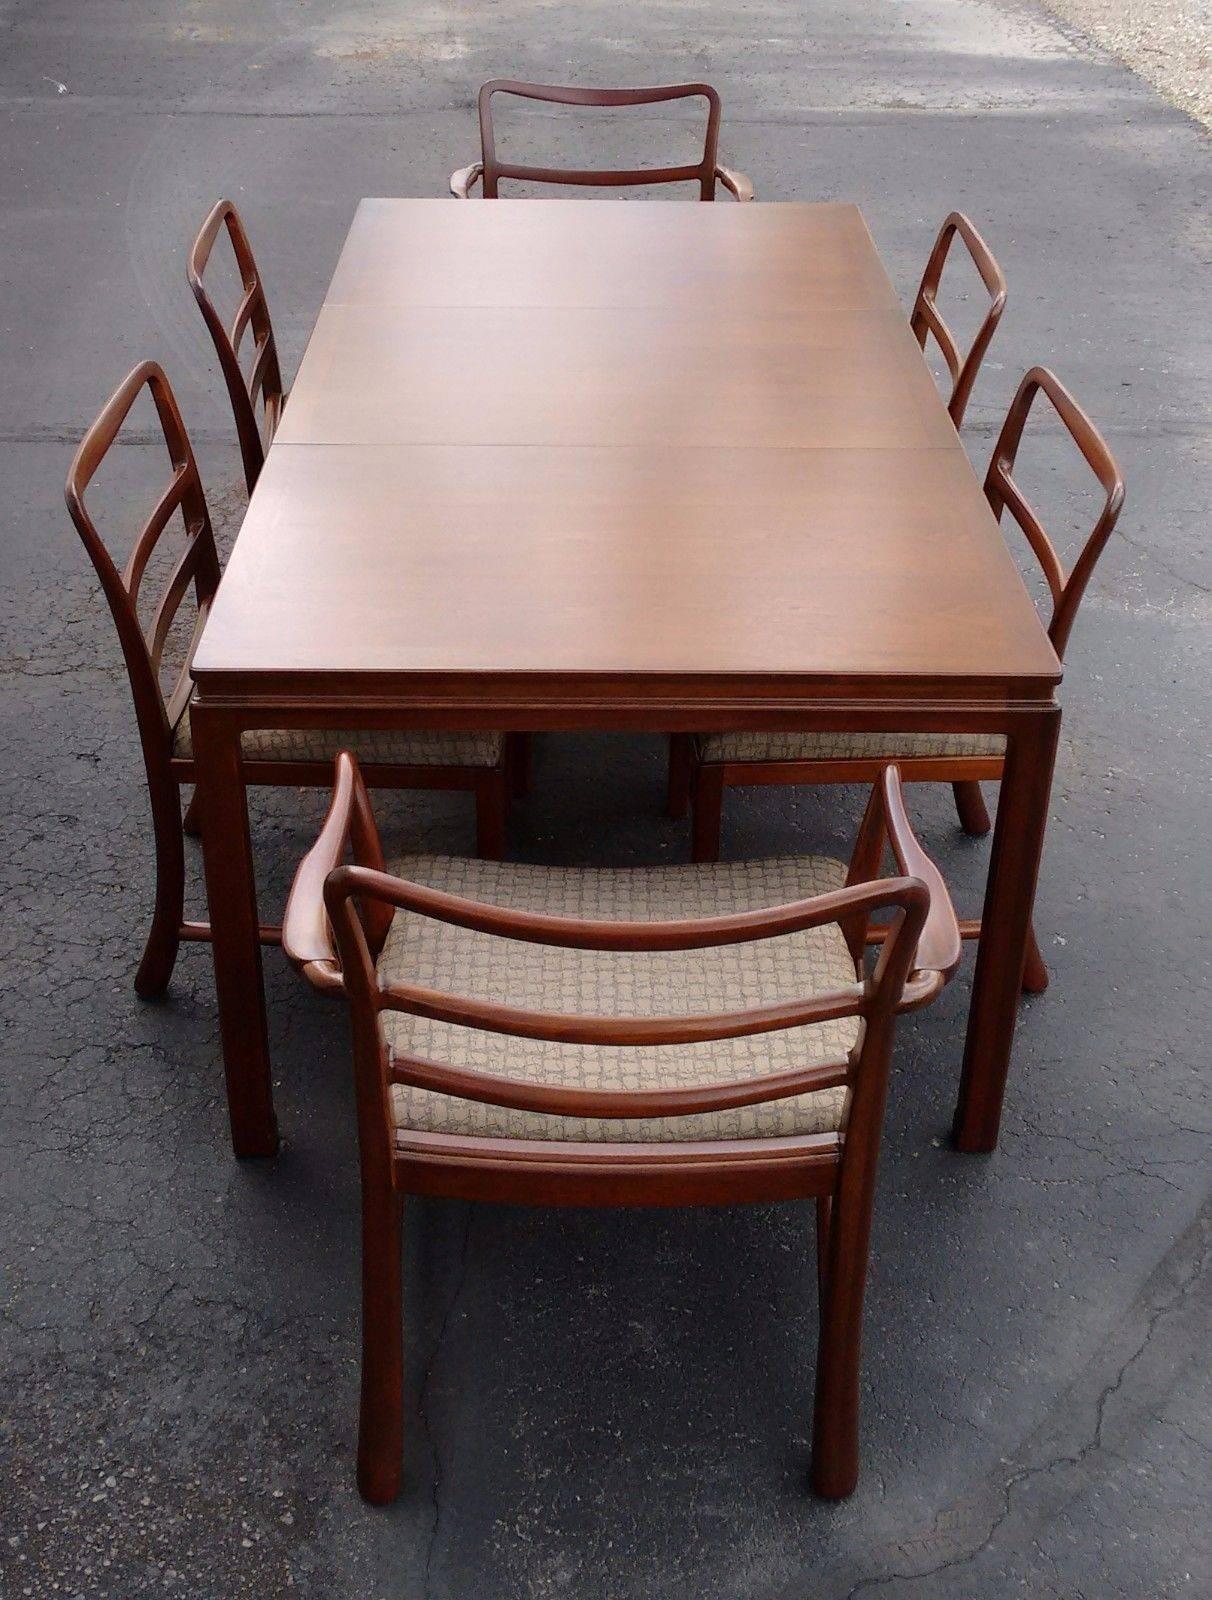 For your consideration is a brown mahogany dining table by Dunbar with six chairs, four side chairs and two with arms, and one leaf. In excellent condition. Professionally restored and refinished. The dimensions of the chairs with arms are 33